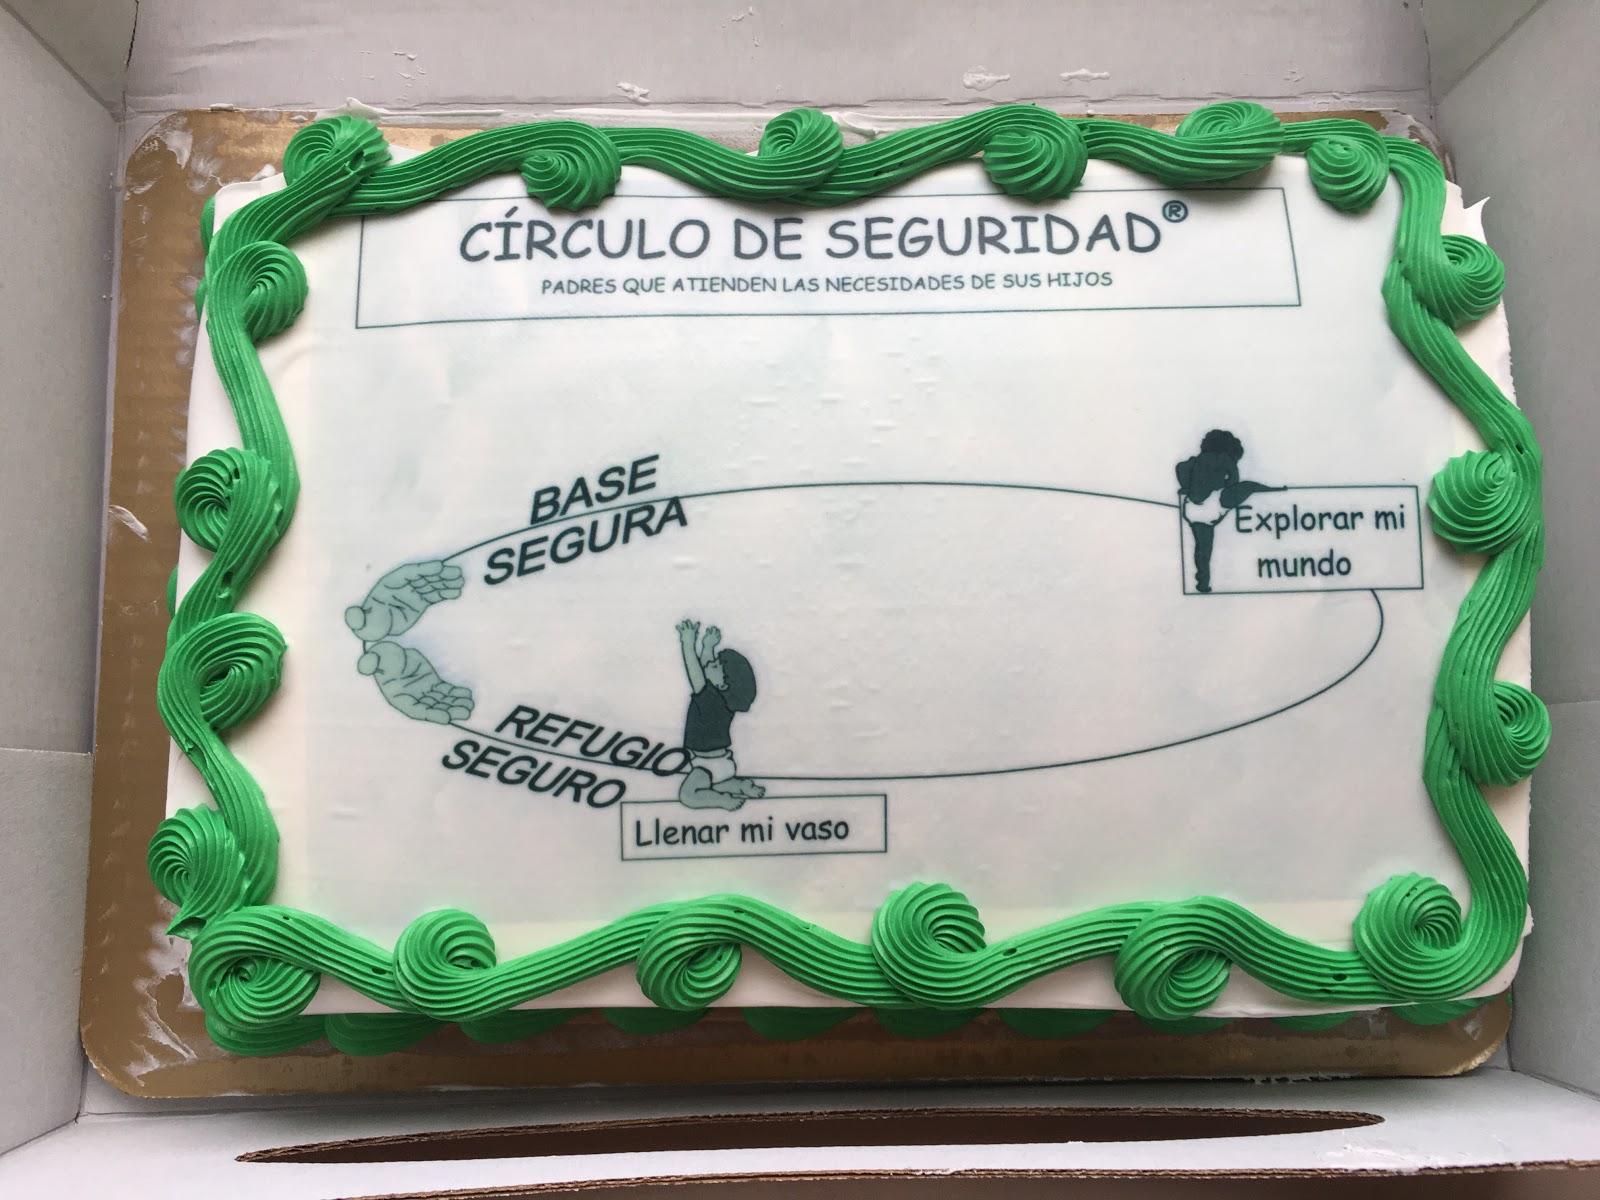 A celebratory cake with Circle of Security artwork on the frosting